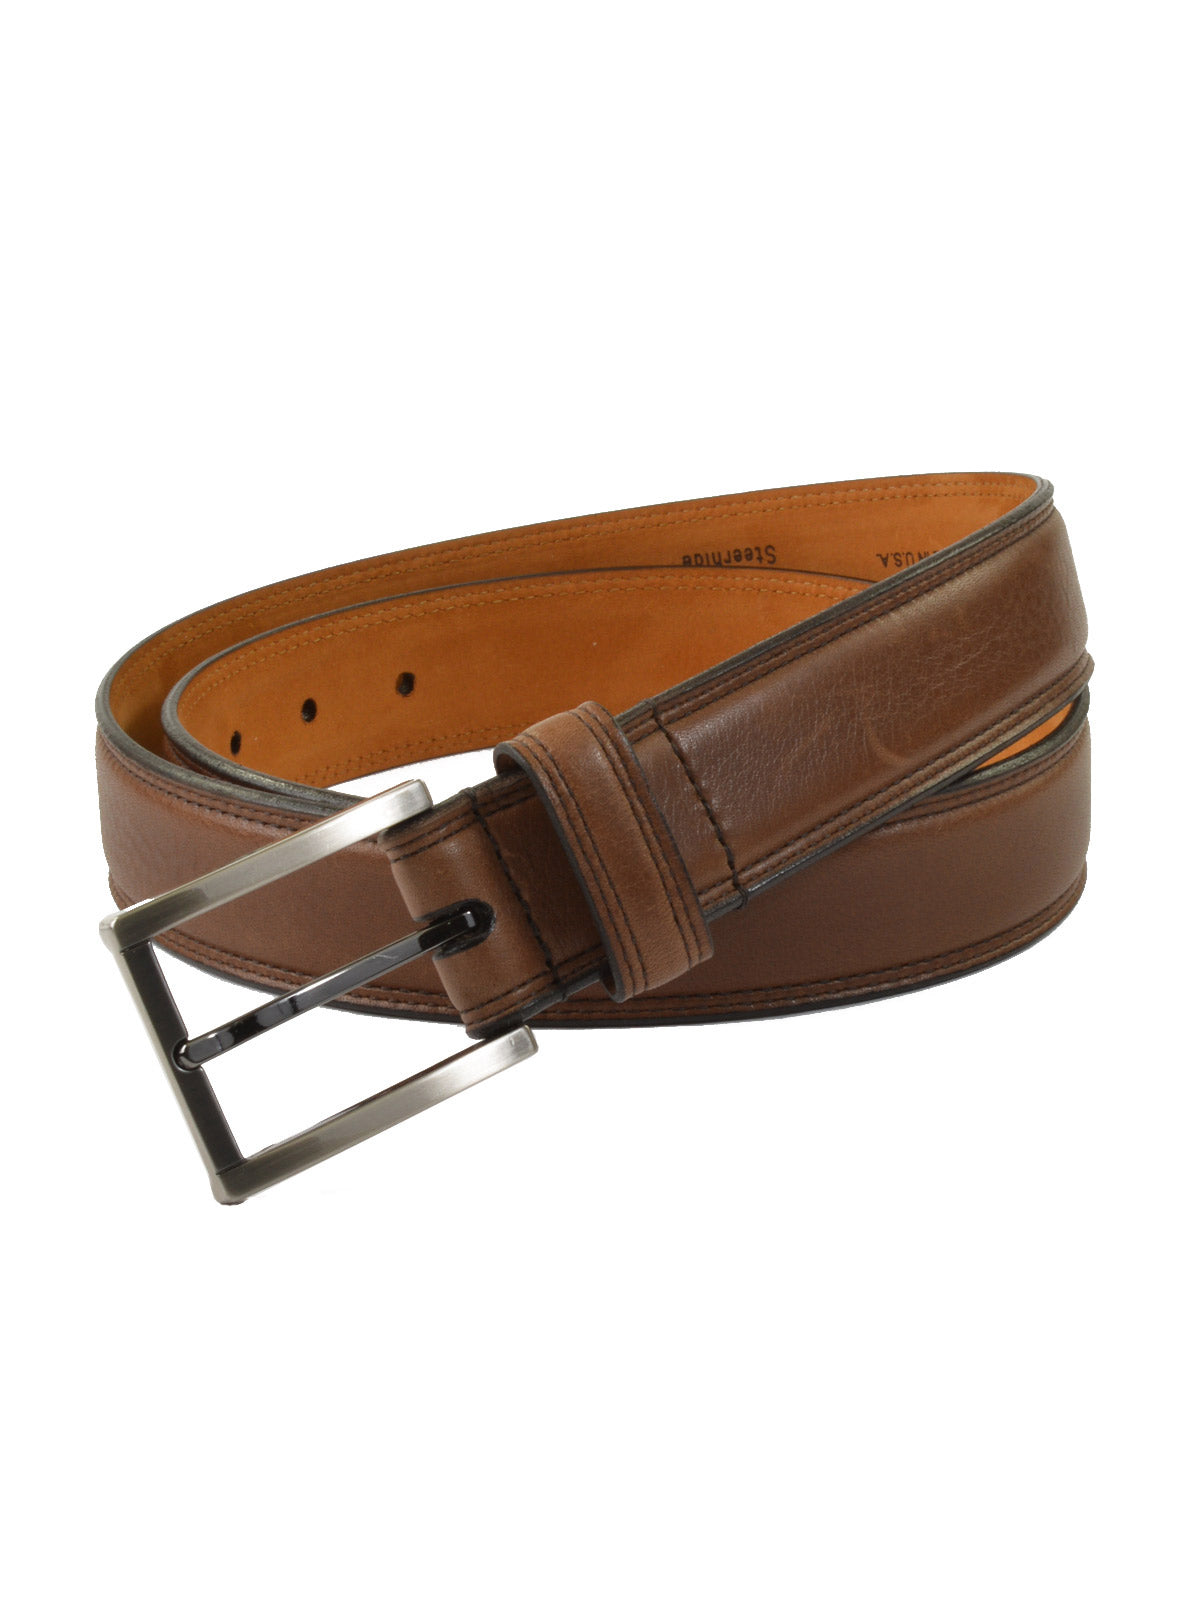 Lejon Glove Tanned Leather Dignitary Belts in Brown - Regular Sizes